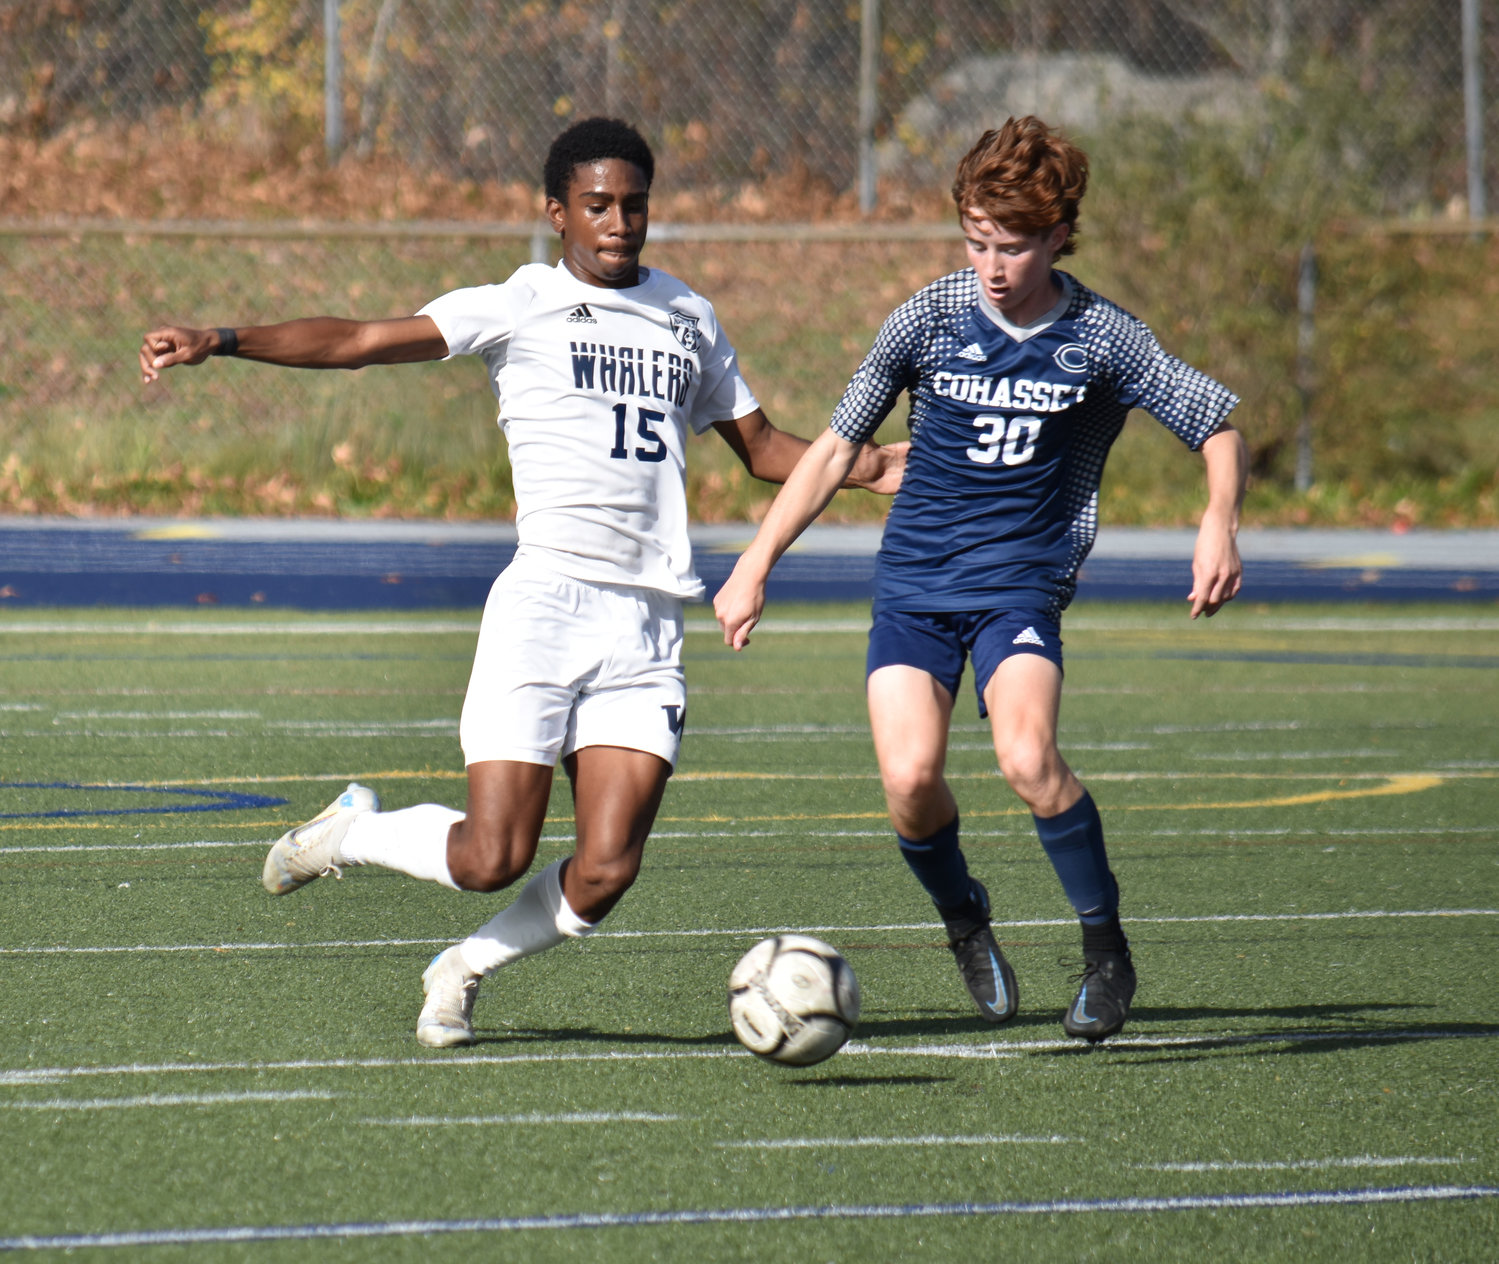 Rodane Watson defends against a Cohasset player.